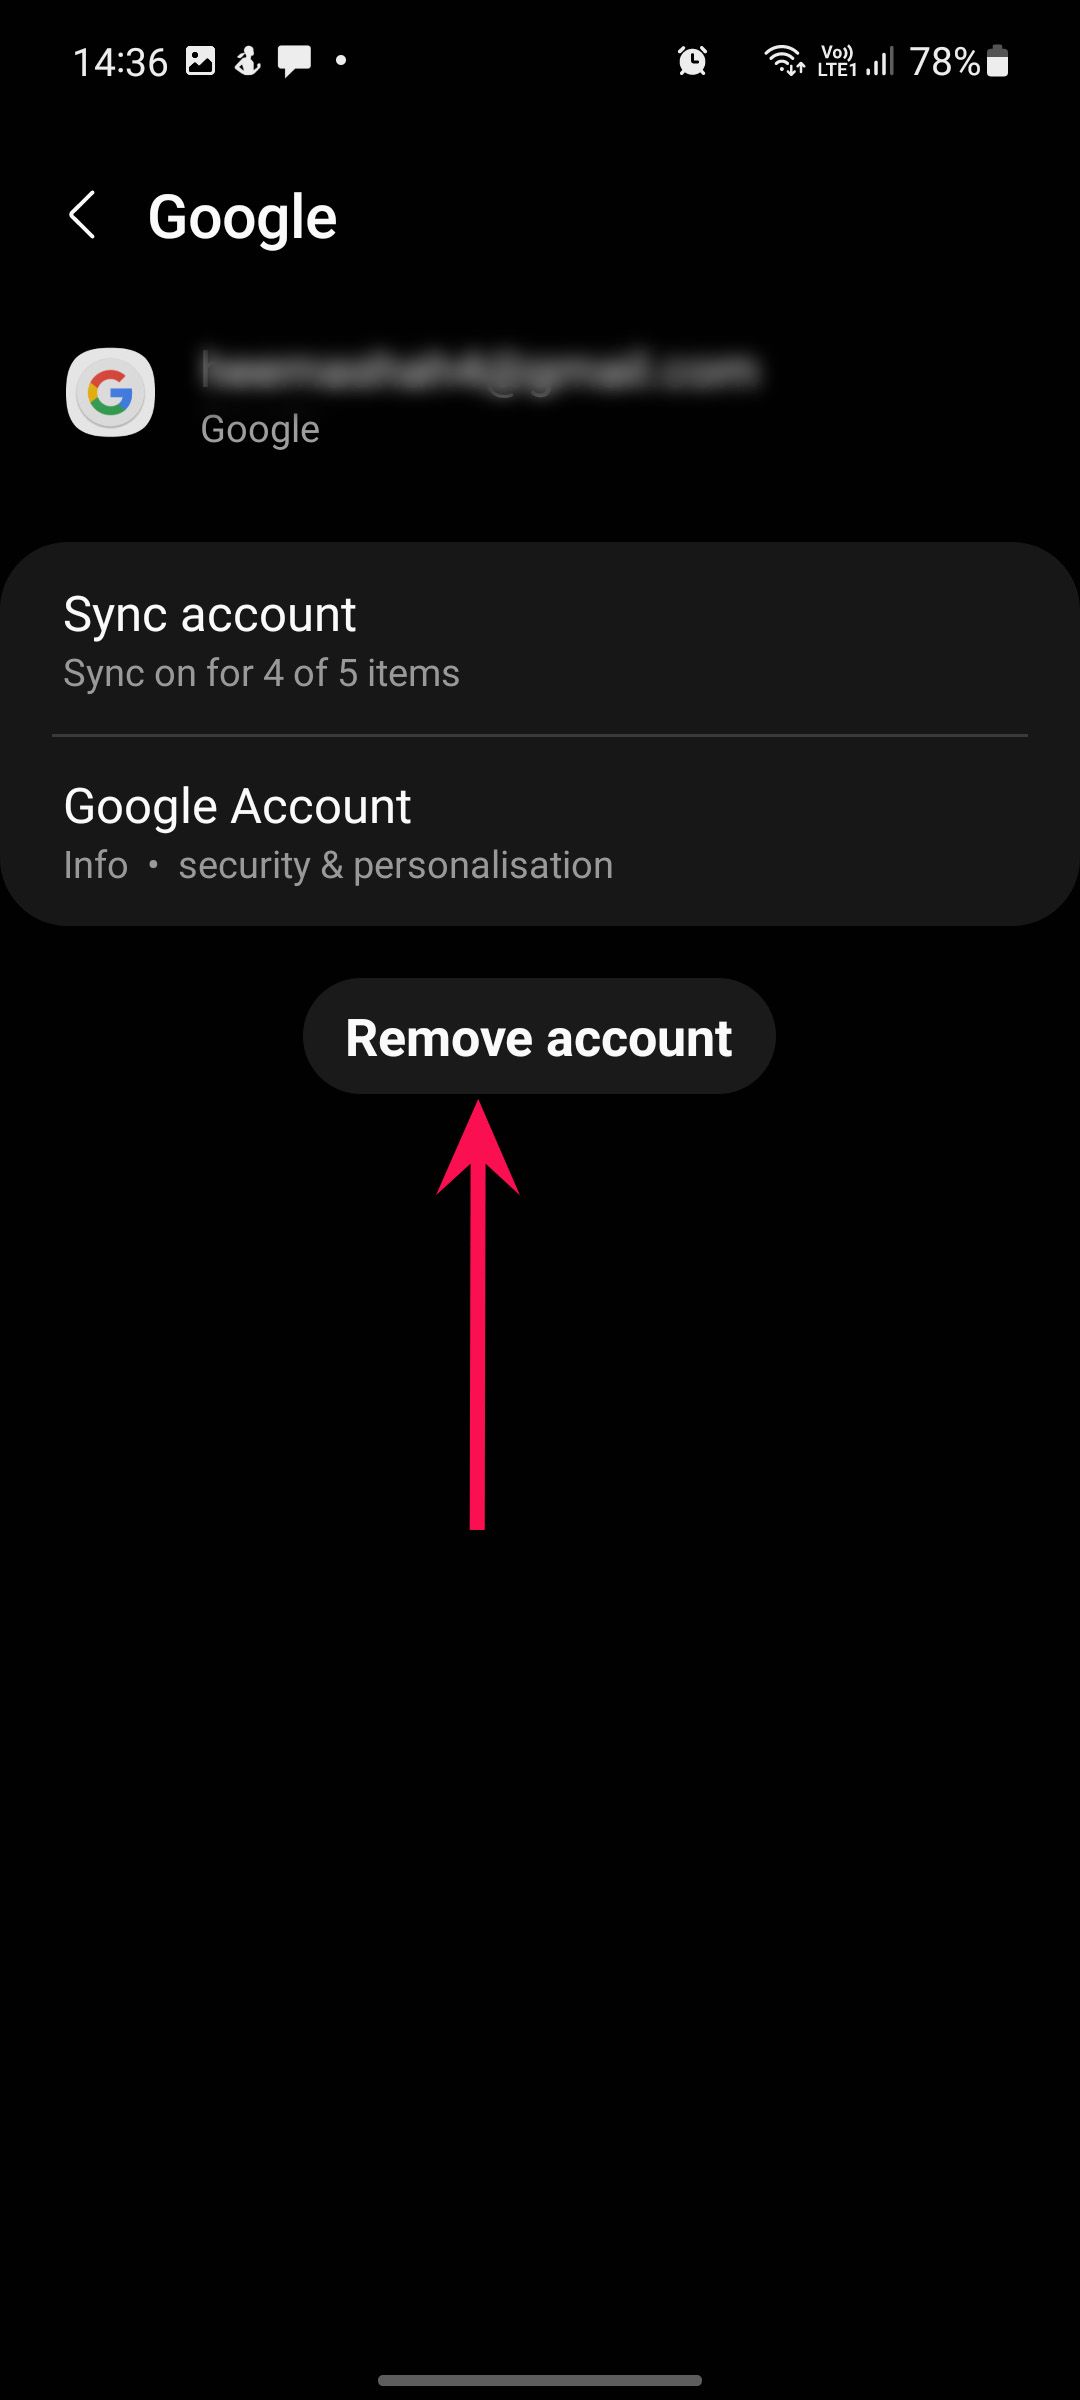 android phone screenshot showing account settings in dark mode